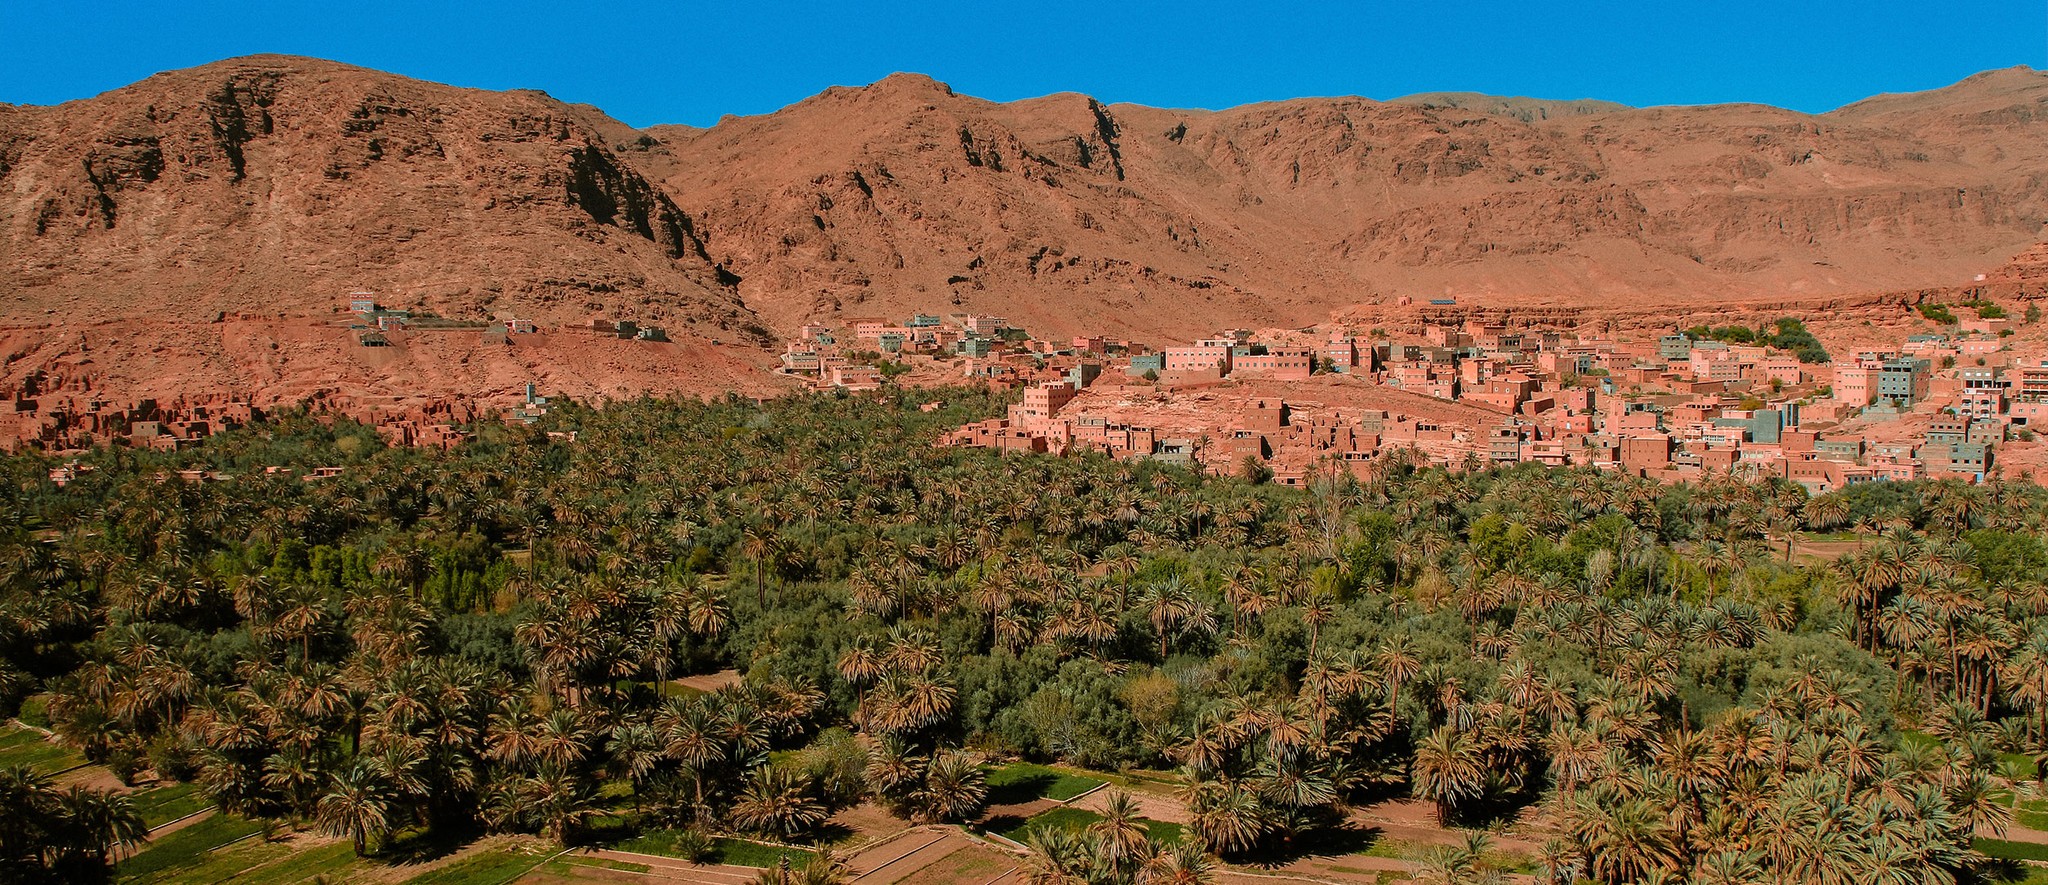 food forest in Morocco